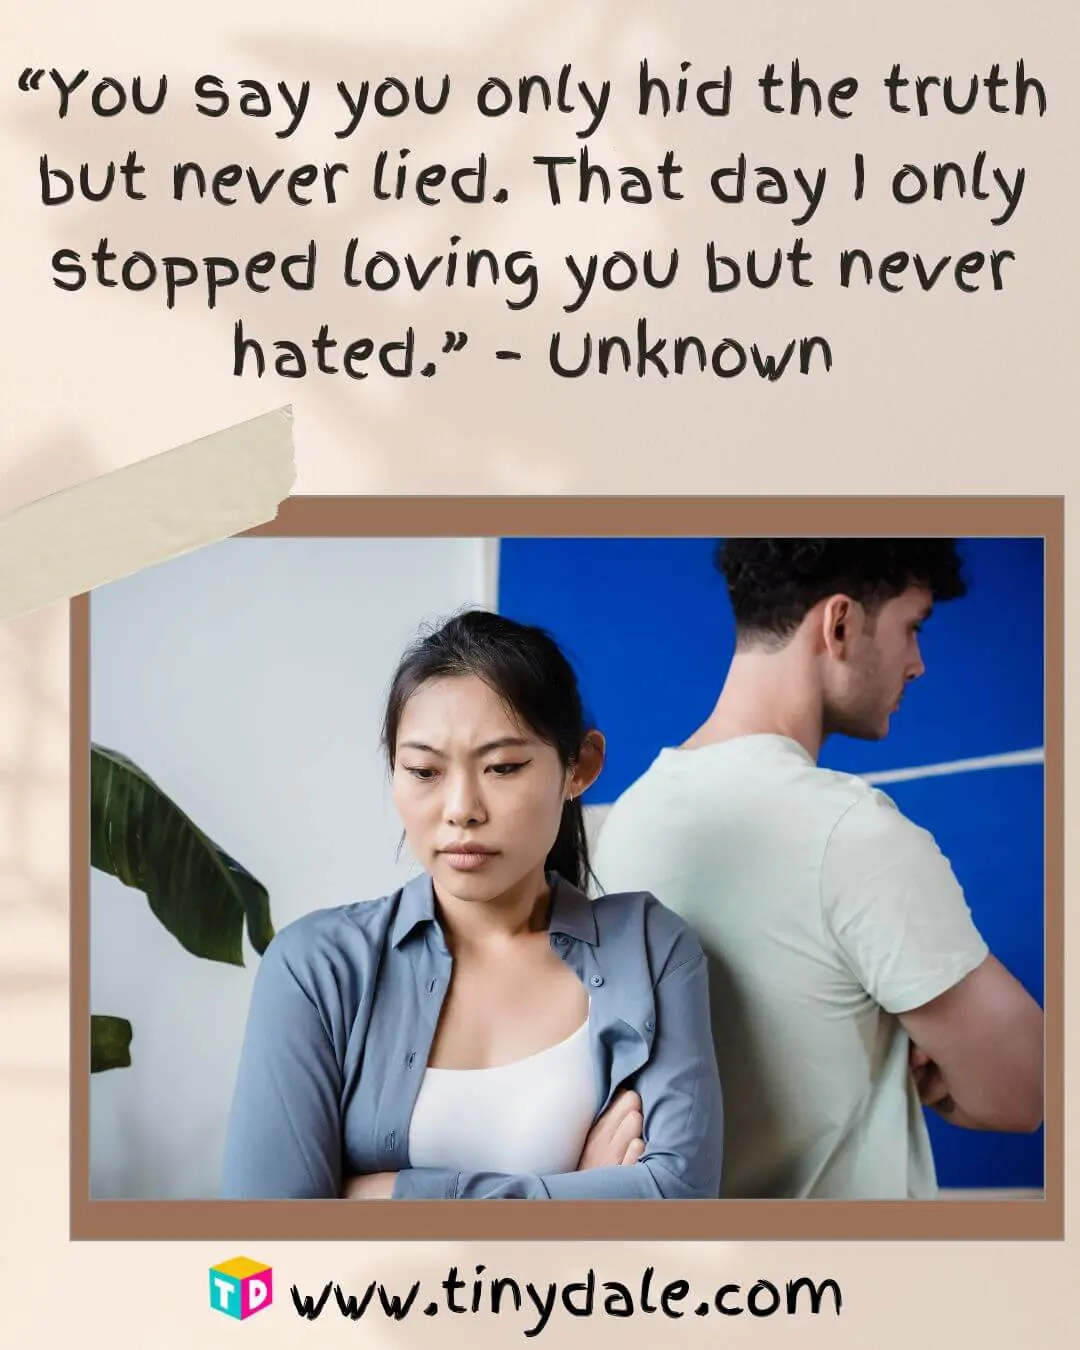 Quotes about lying partner and lying in relationship that will